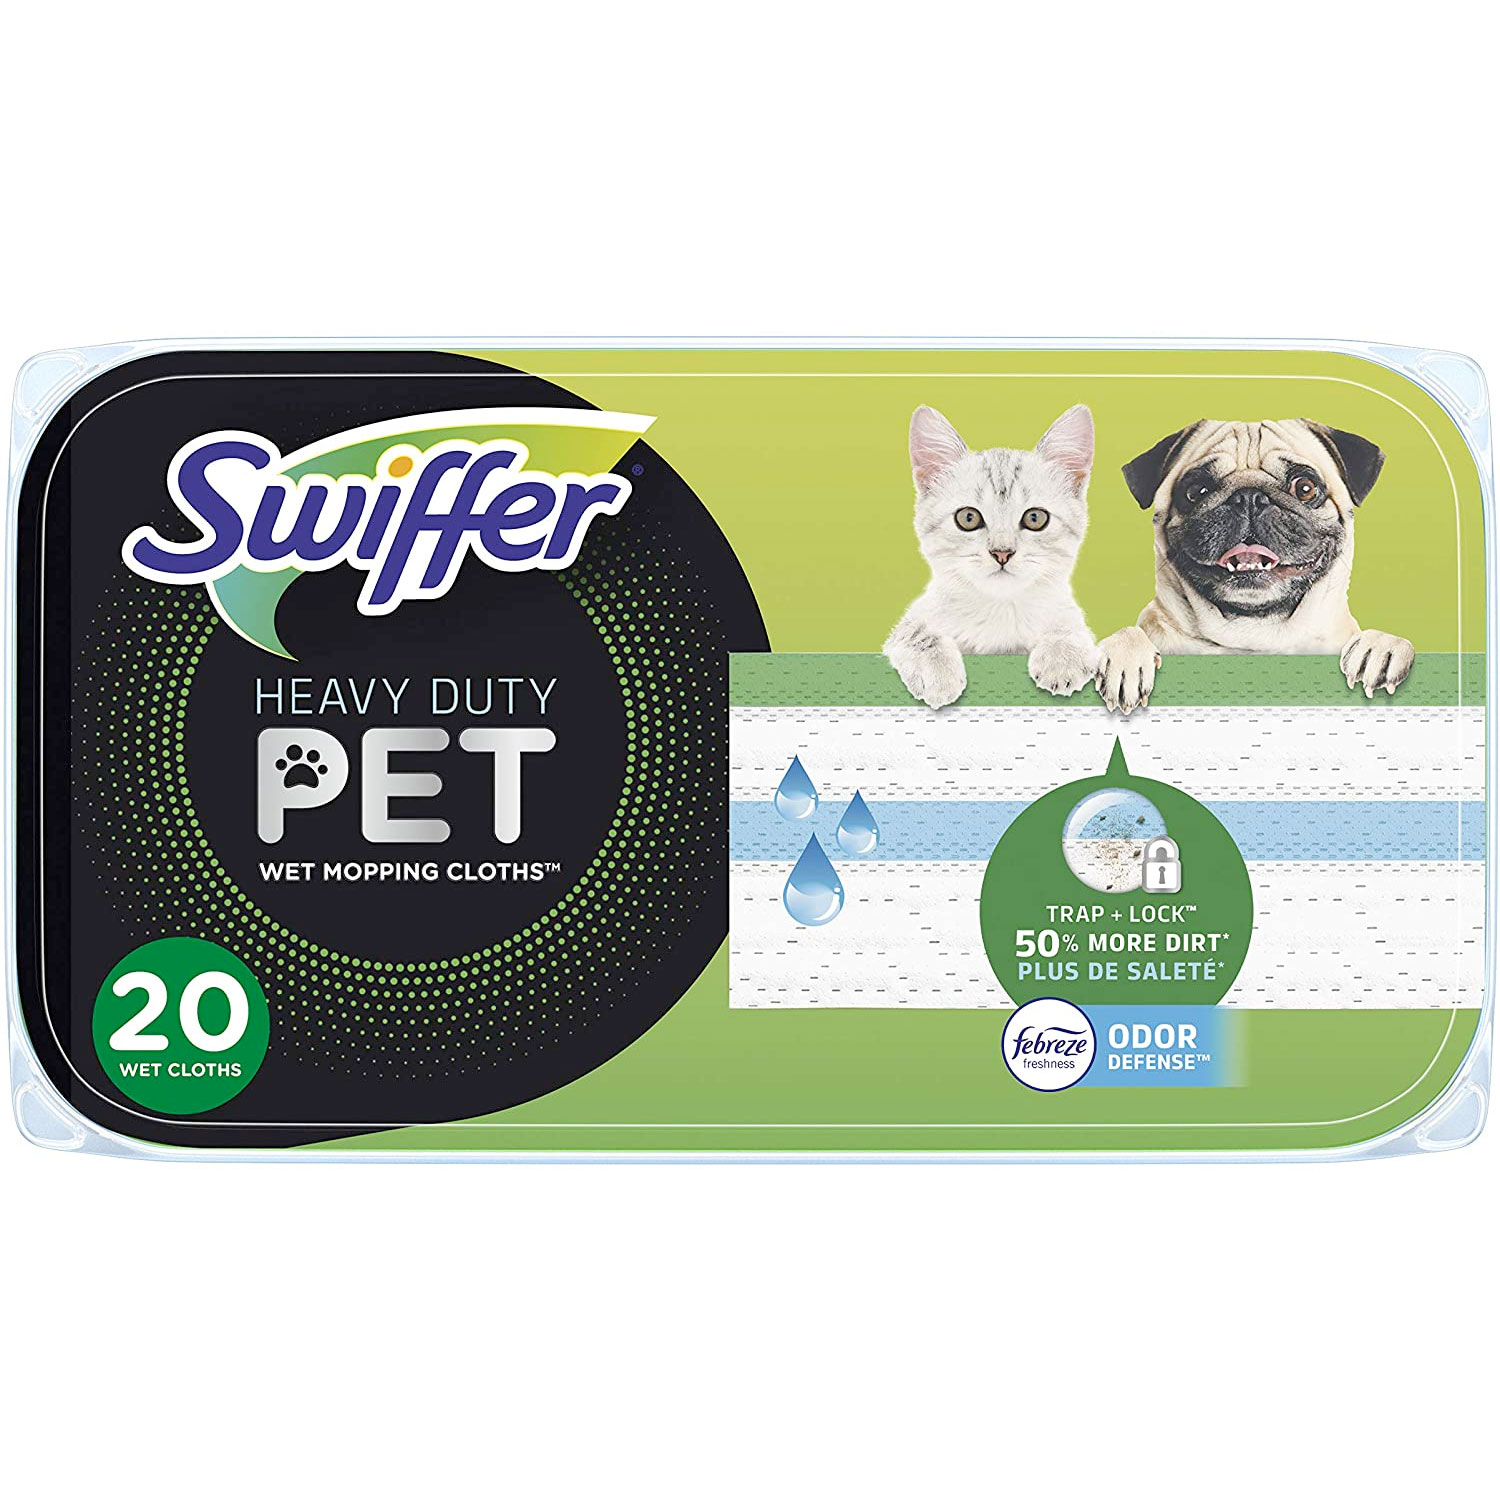 Amazon：Swiffer Sweeper Wet Mop Refills for Floor Mopping and Cleaning (20 Count)只賣$7.77